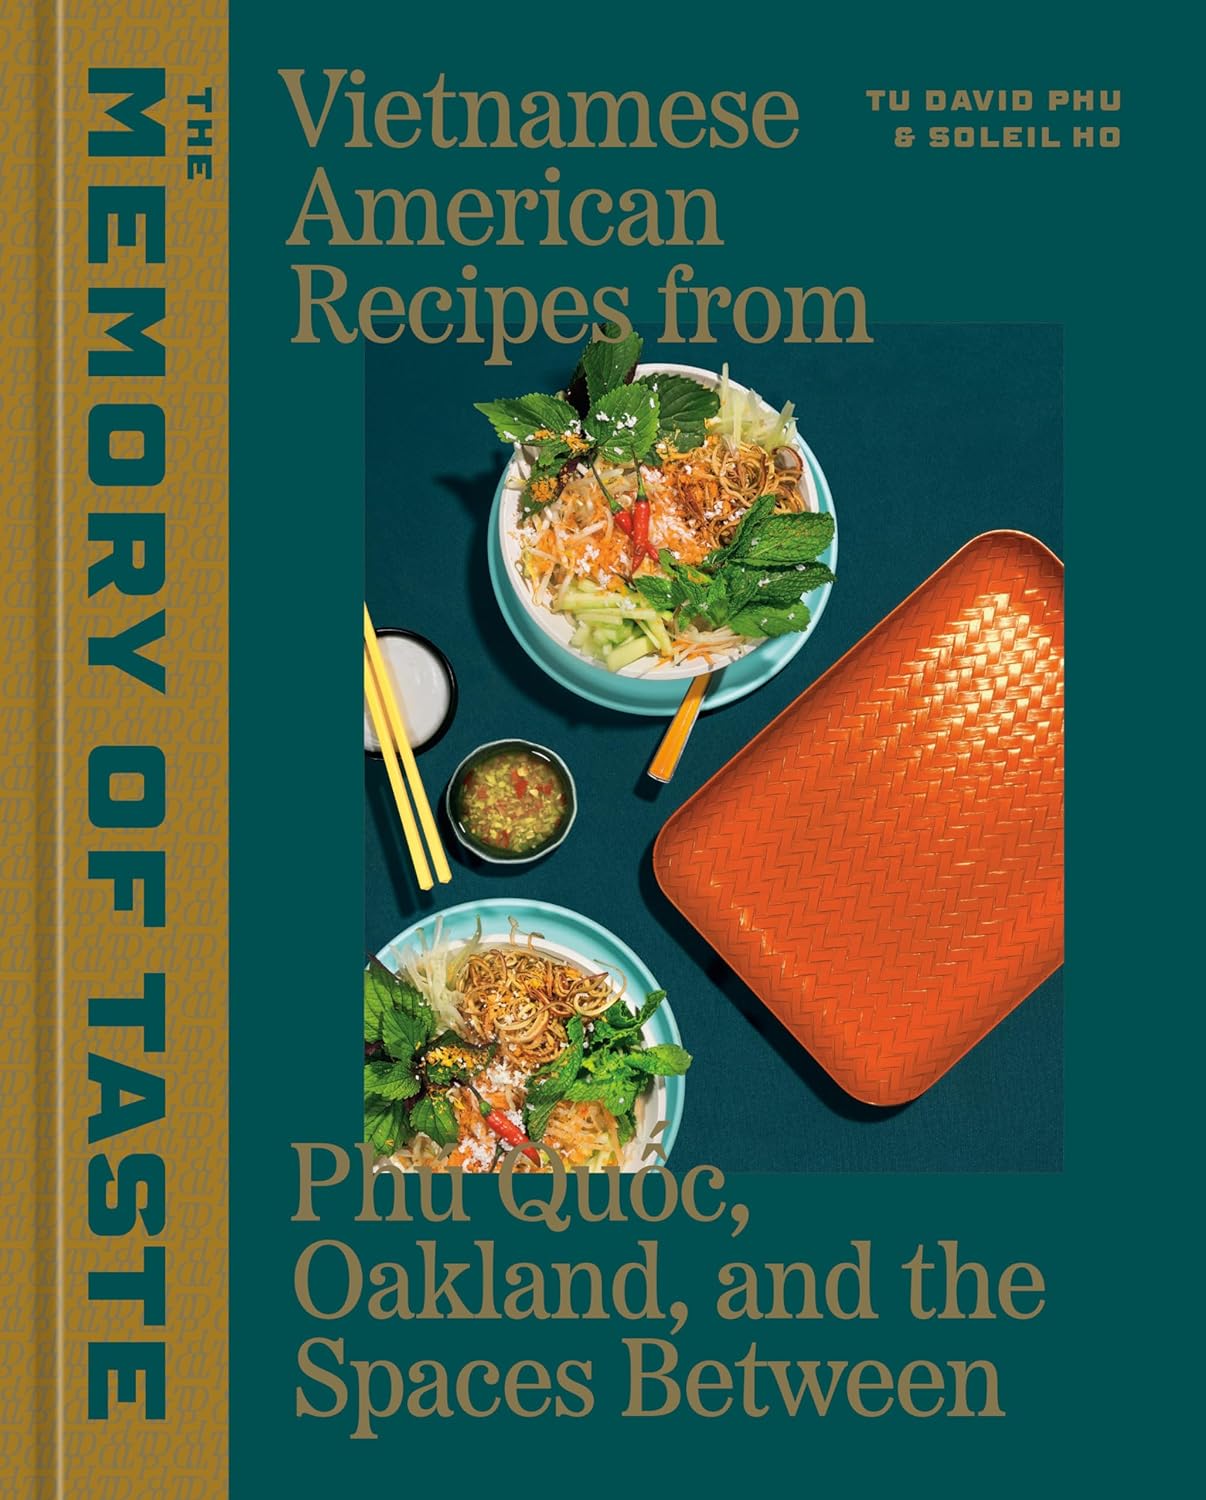 *Pre-order* The Memory of Taste: Vietnamese American Recipes from Phú Quoc, Oakland, and the Spaces Between (Tu David Phu, Soleil Ho) *Signed*